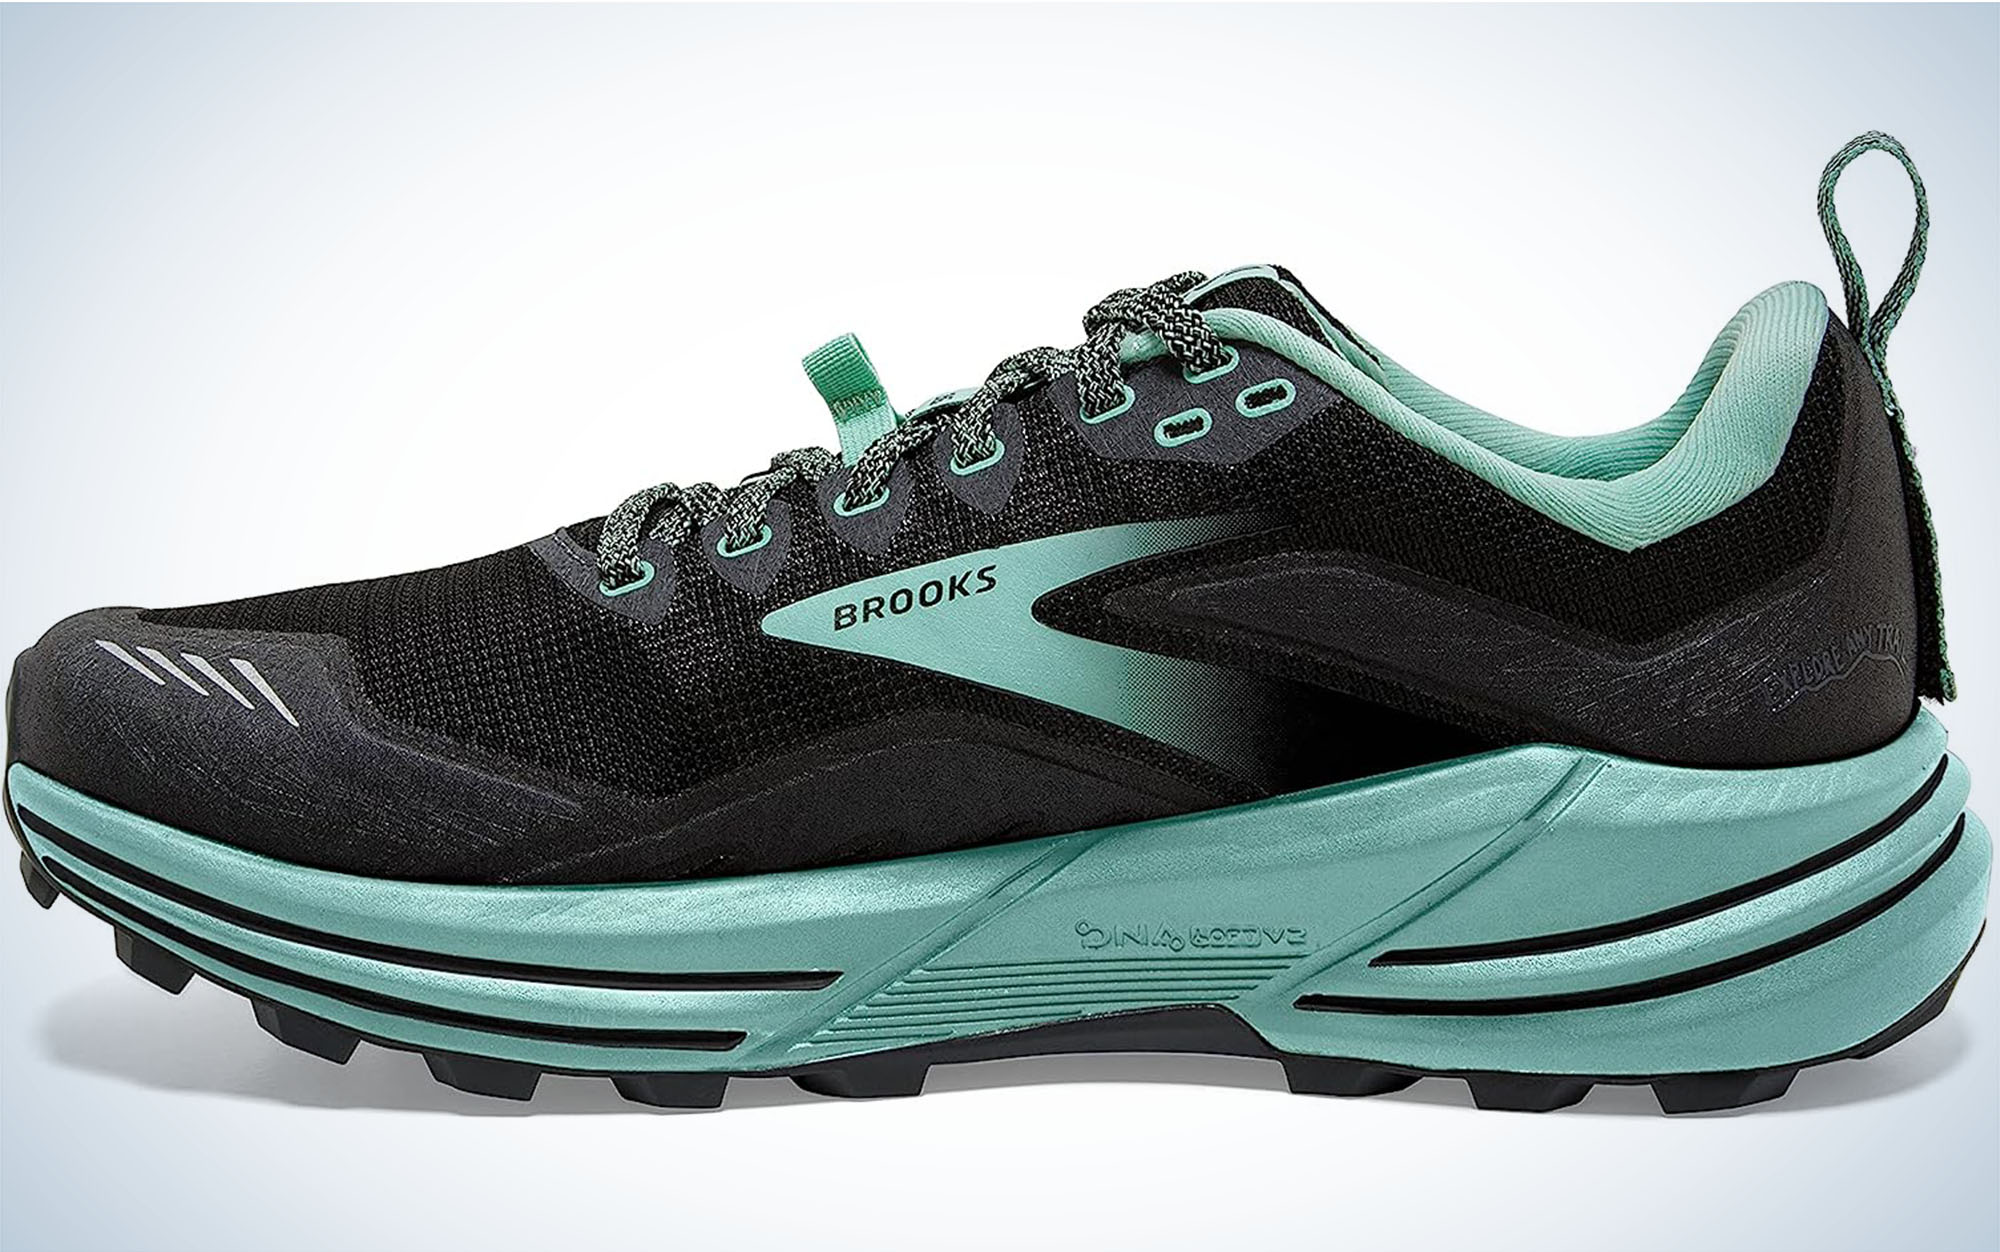 The Brooks Cascadia 16 are the best for boot wearers.